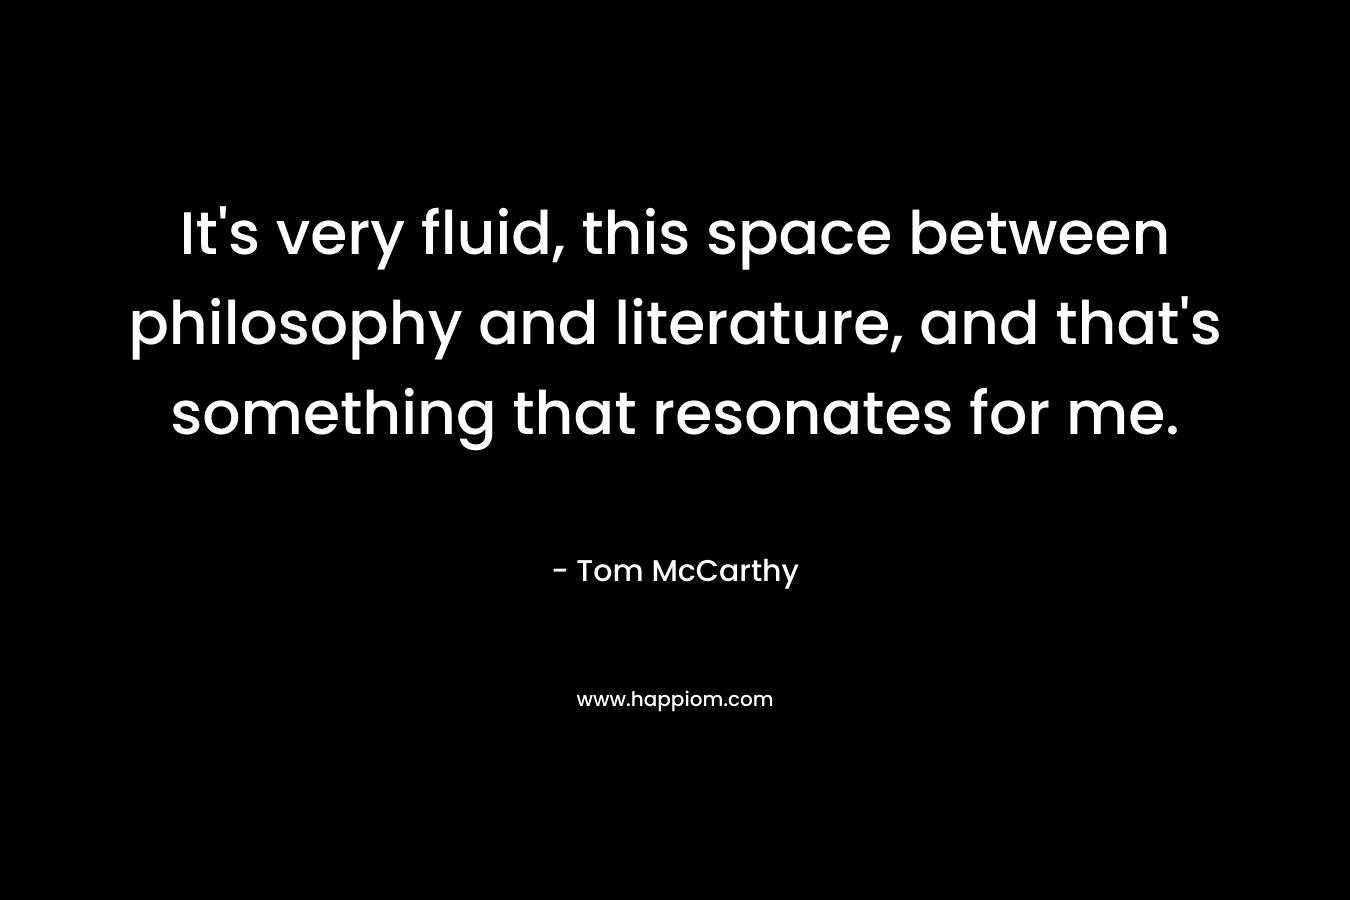 It's very fluid, this space between philosophy and literature, and that's something that resonates for me.